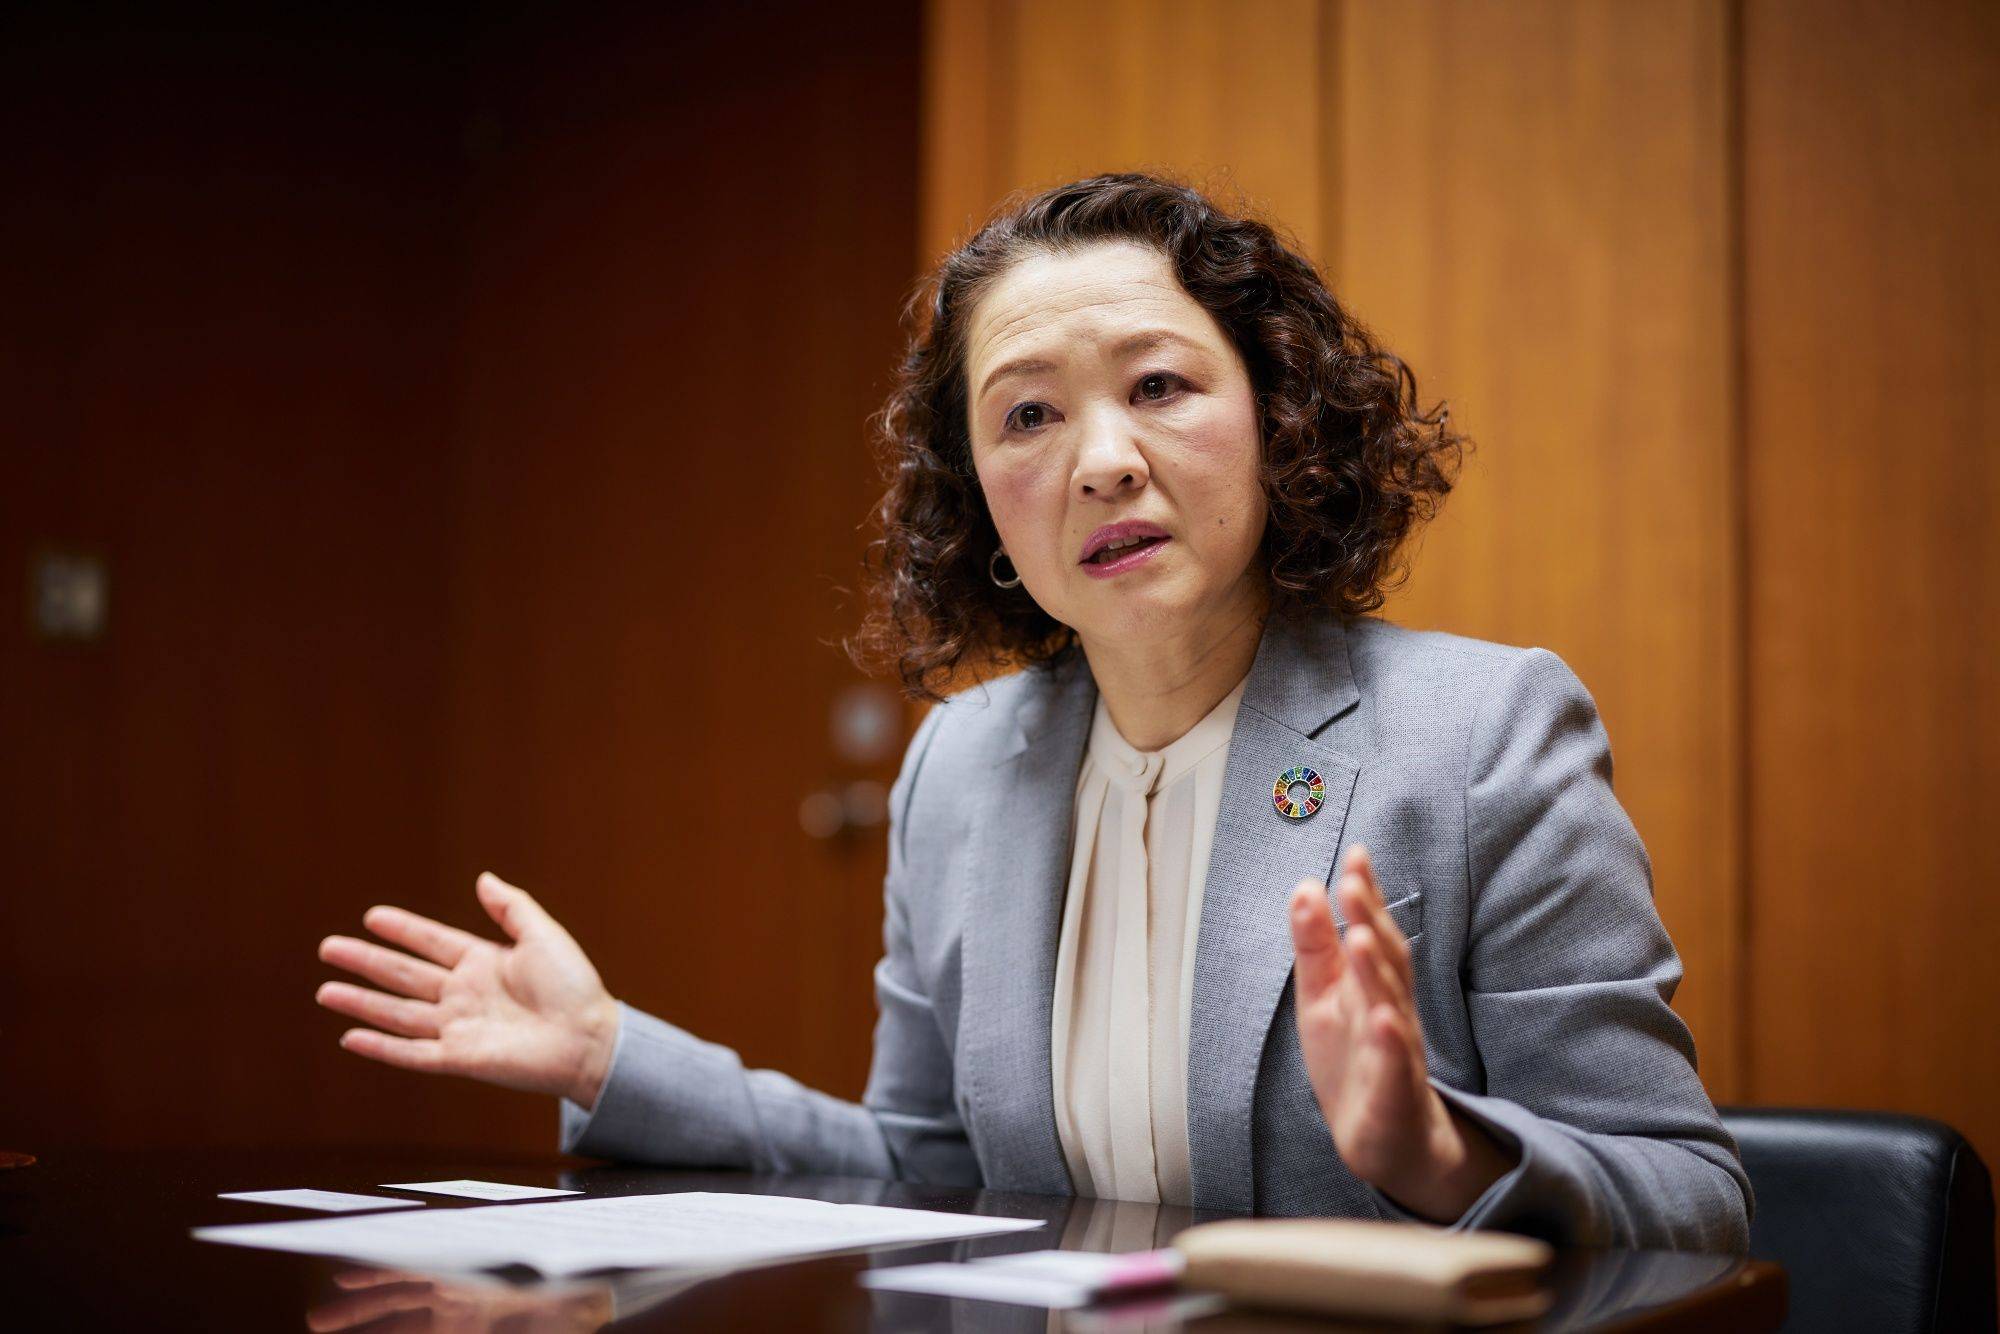 Tomoko Yoshino, president of the Japanese Trade Union Confederation, commonly known as Rengo, speaks in an interview in Tokyo on Monday. | BLOOMBERG